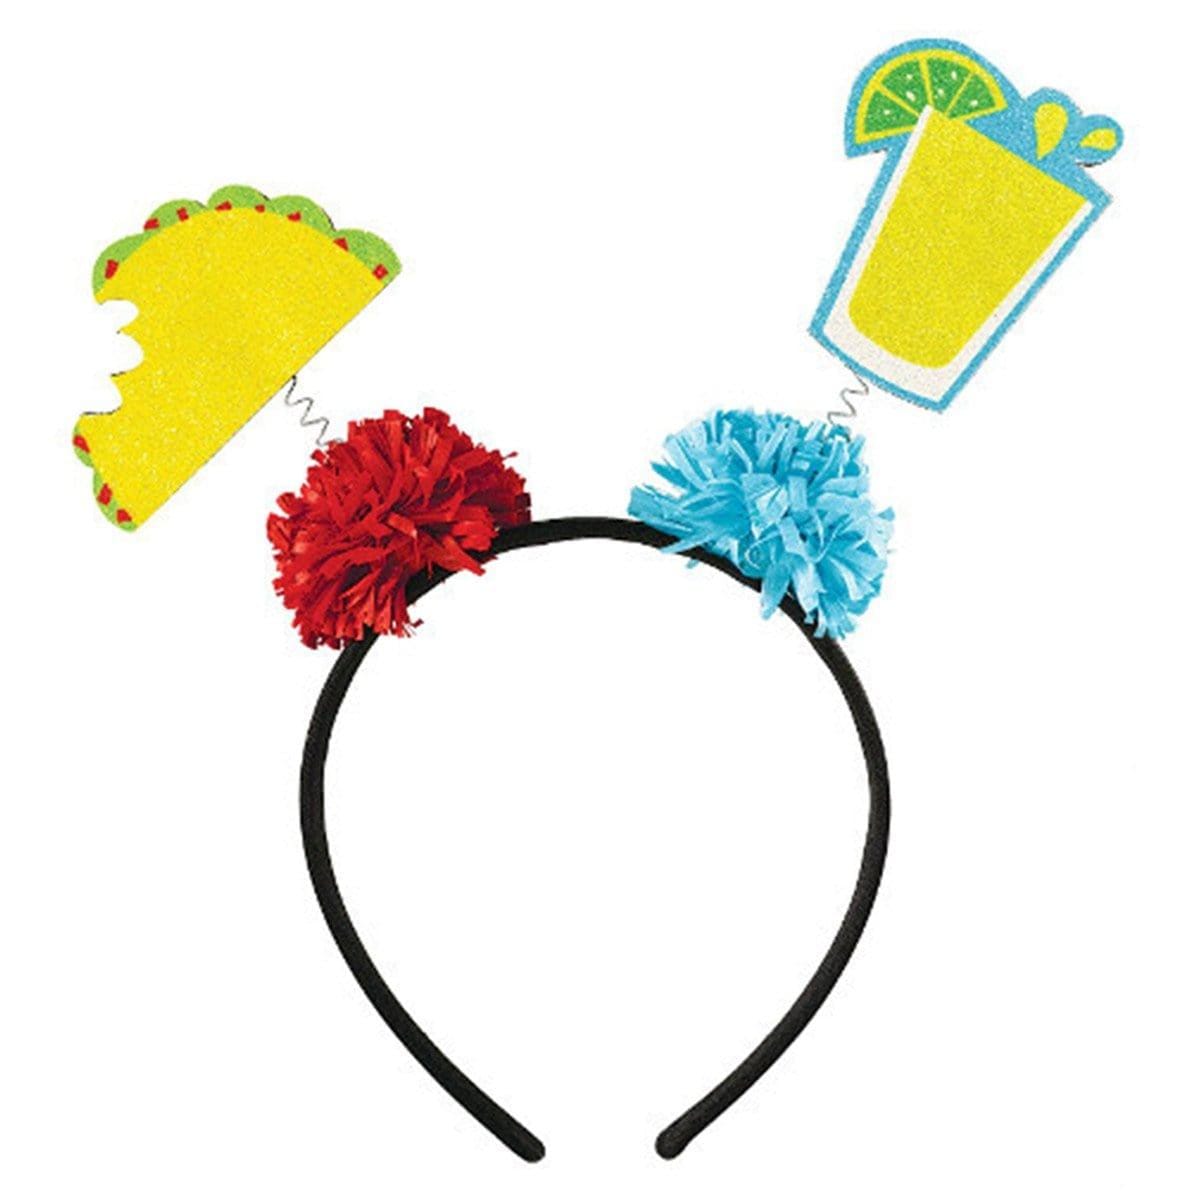 Buy Theme Party Taco & Tequilla Headband for Adults sold at Party Expert